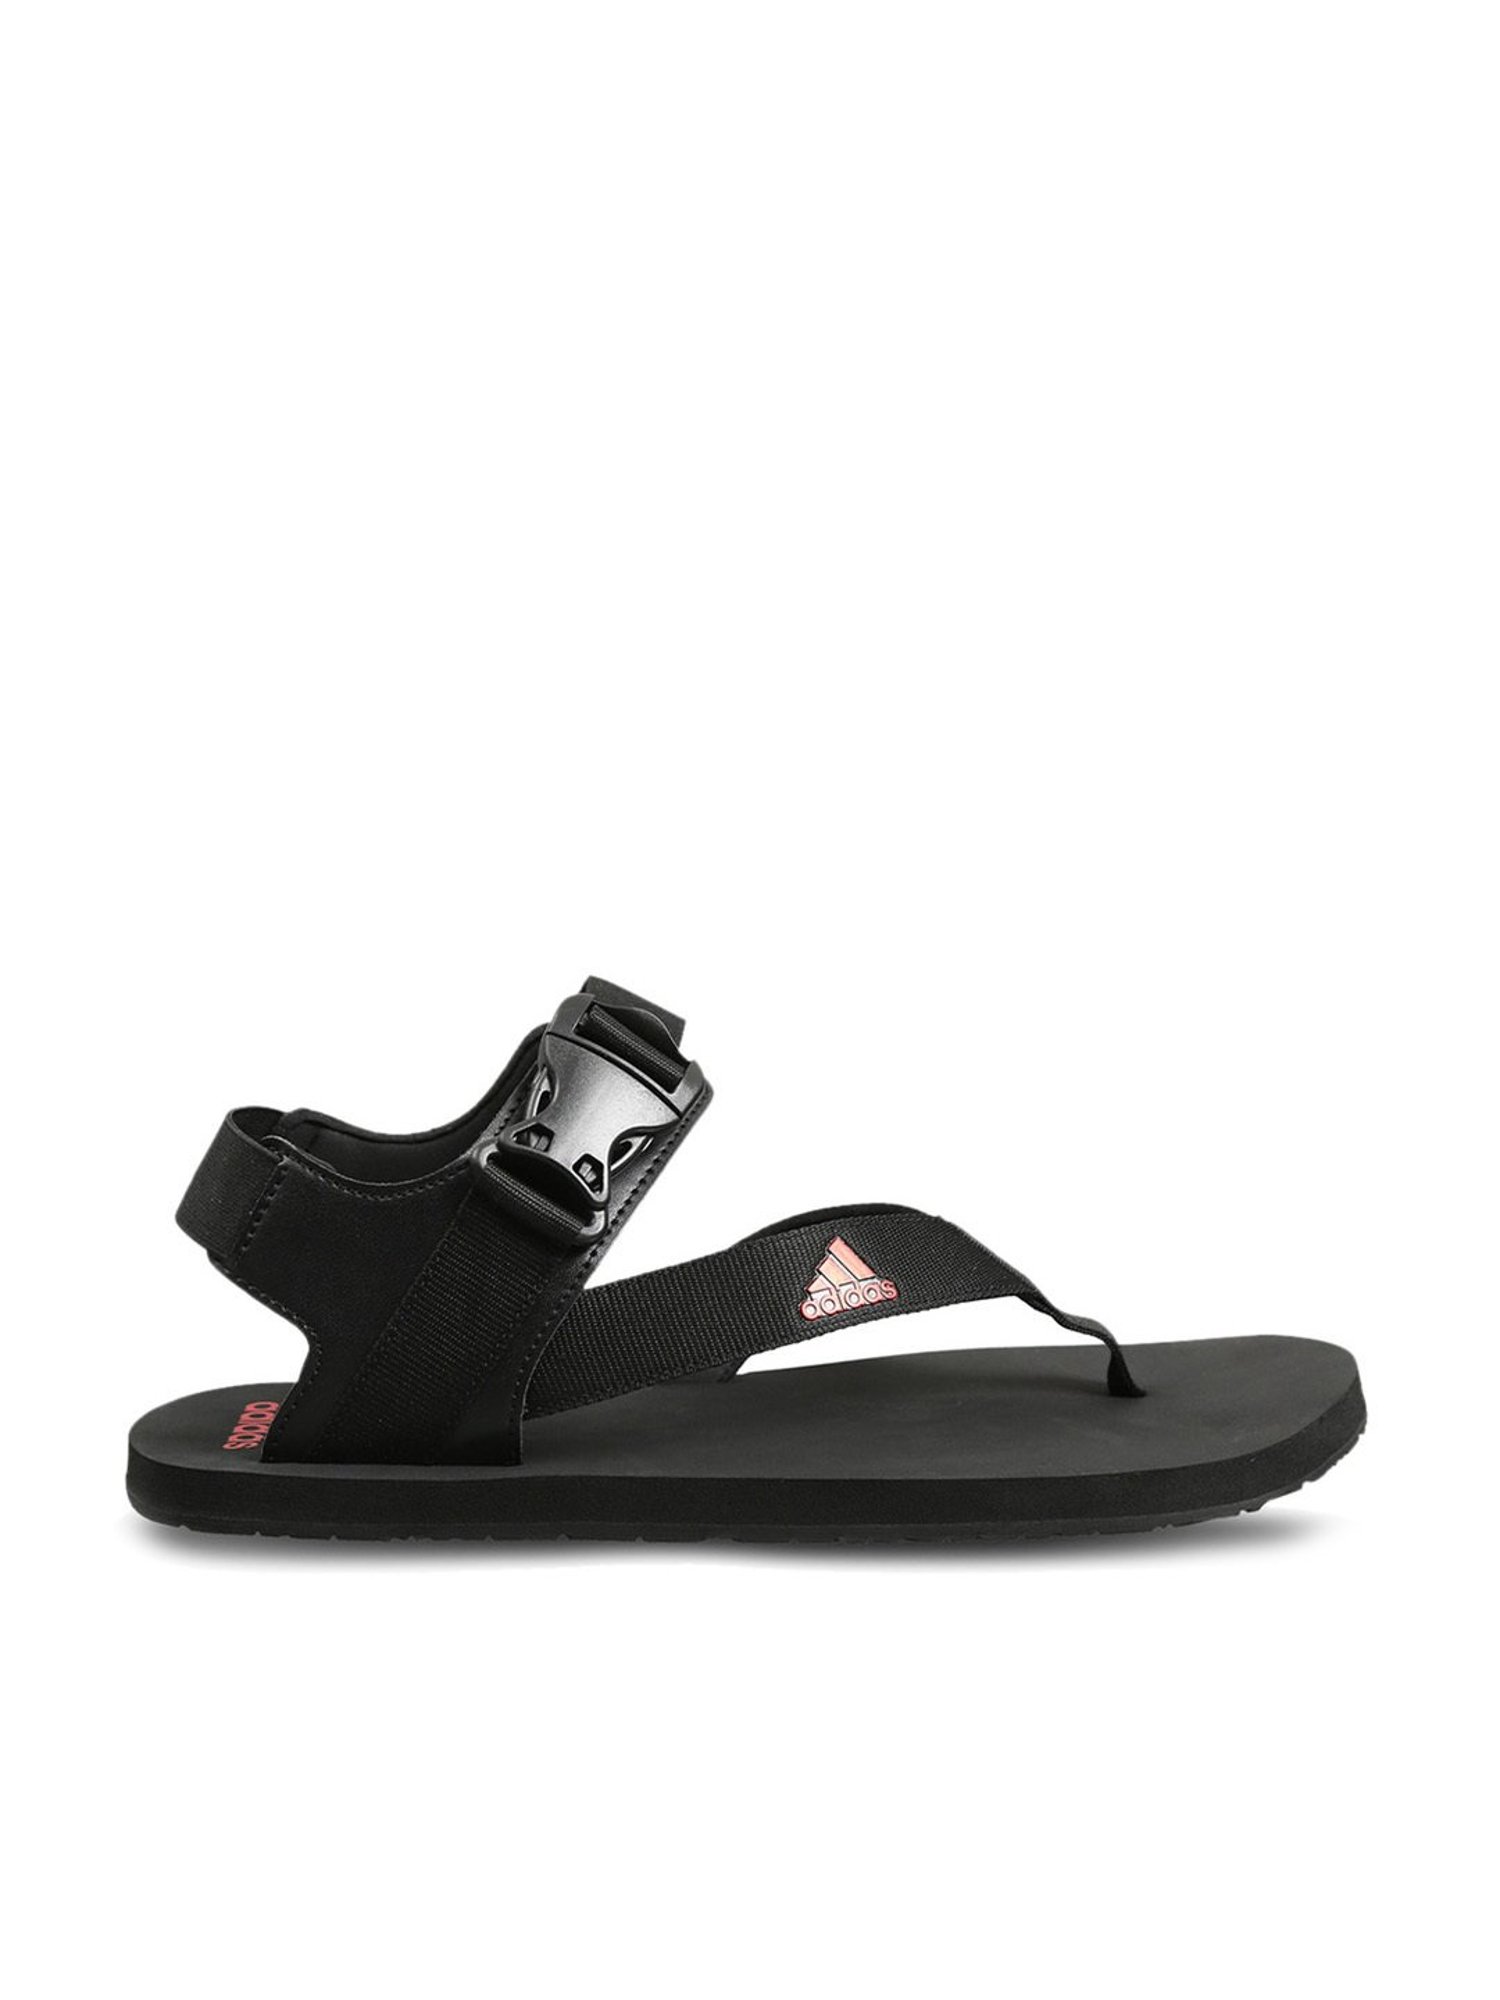 Buy Adidas Sandals & Floaters for men Online at Low Prices in India -  Paytmmall.com